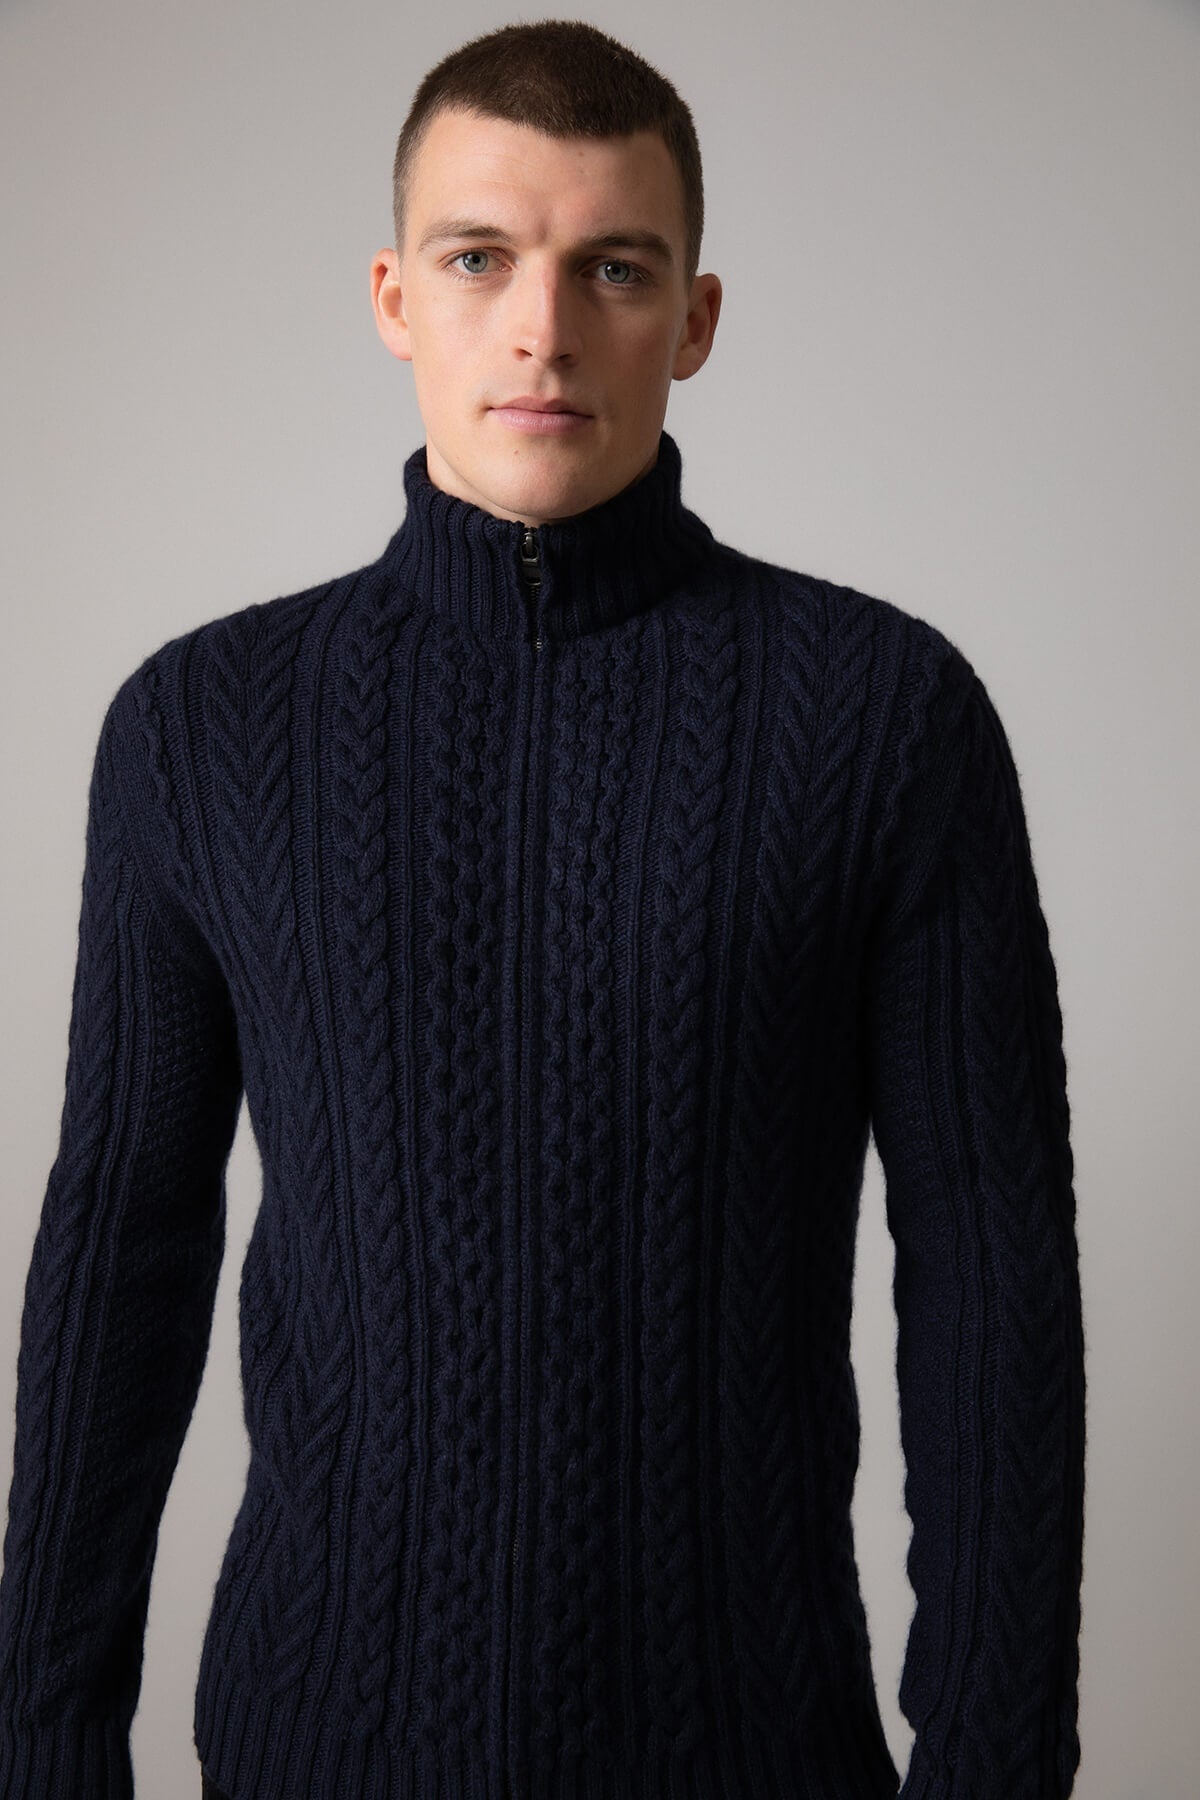 Johnstons of Elgin’s Men's Aran Cable Cashmere Zip Cardigan in Dark Navy on model on a grey background KAI05119Q23706